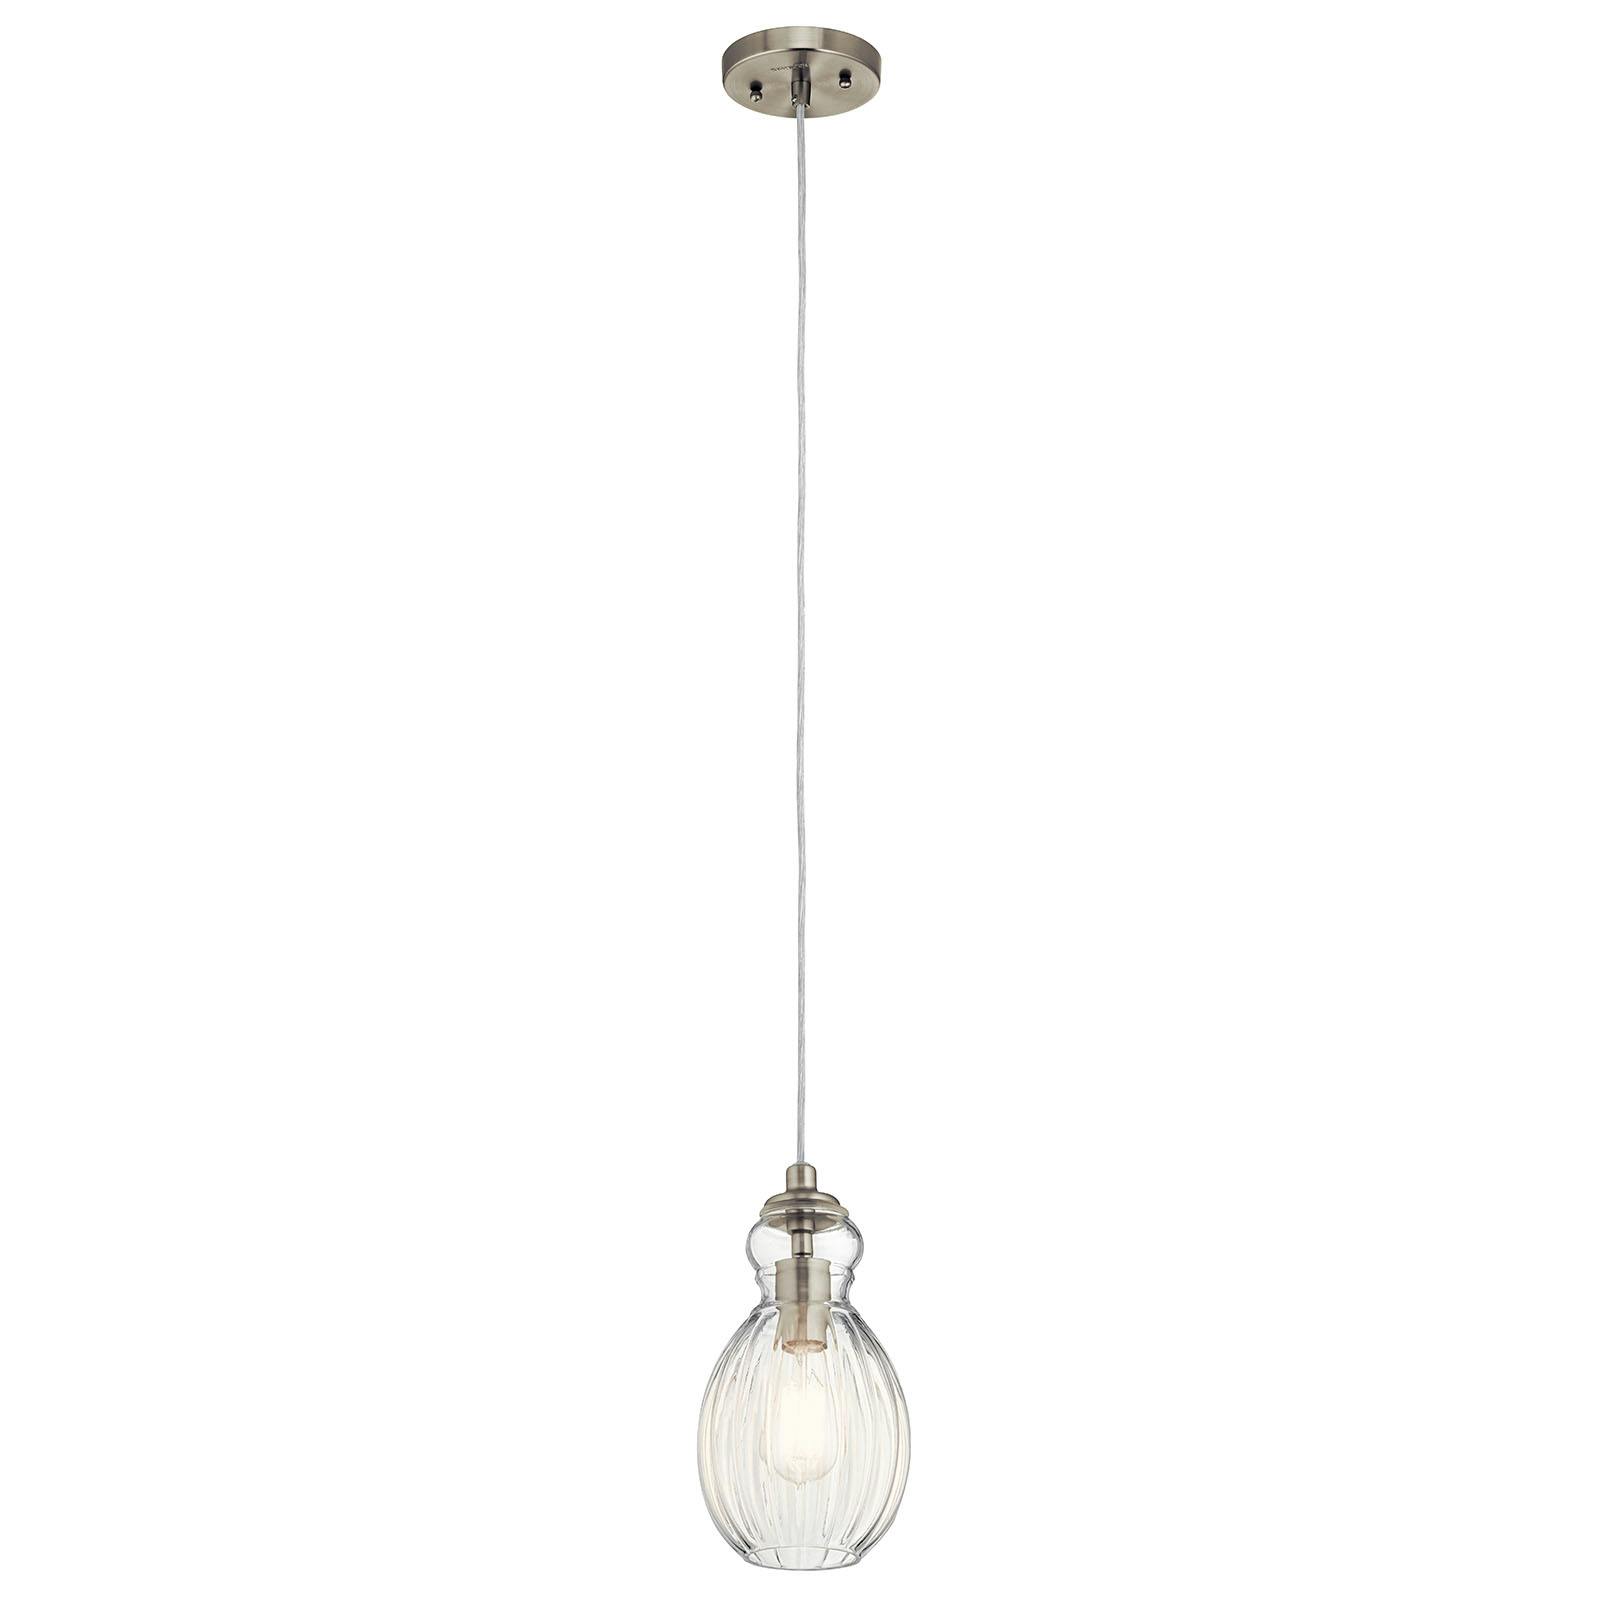 Riviera 11.25" 1 Light Pendant in Nickel on a white background